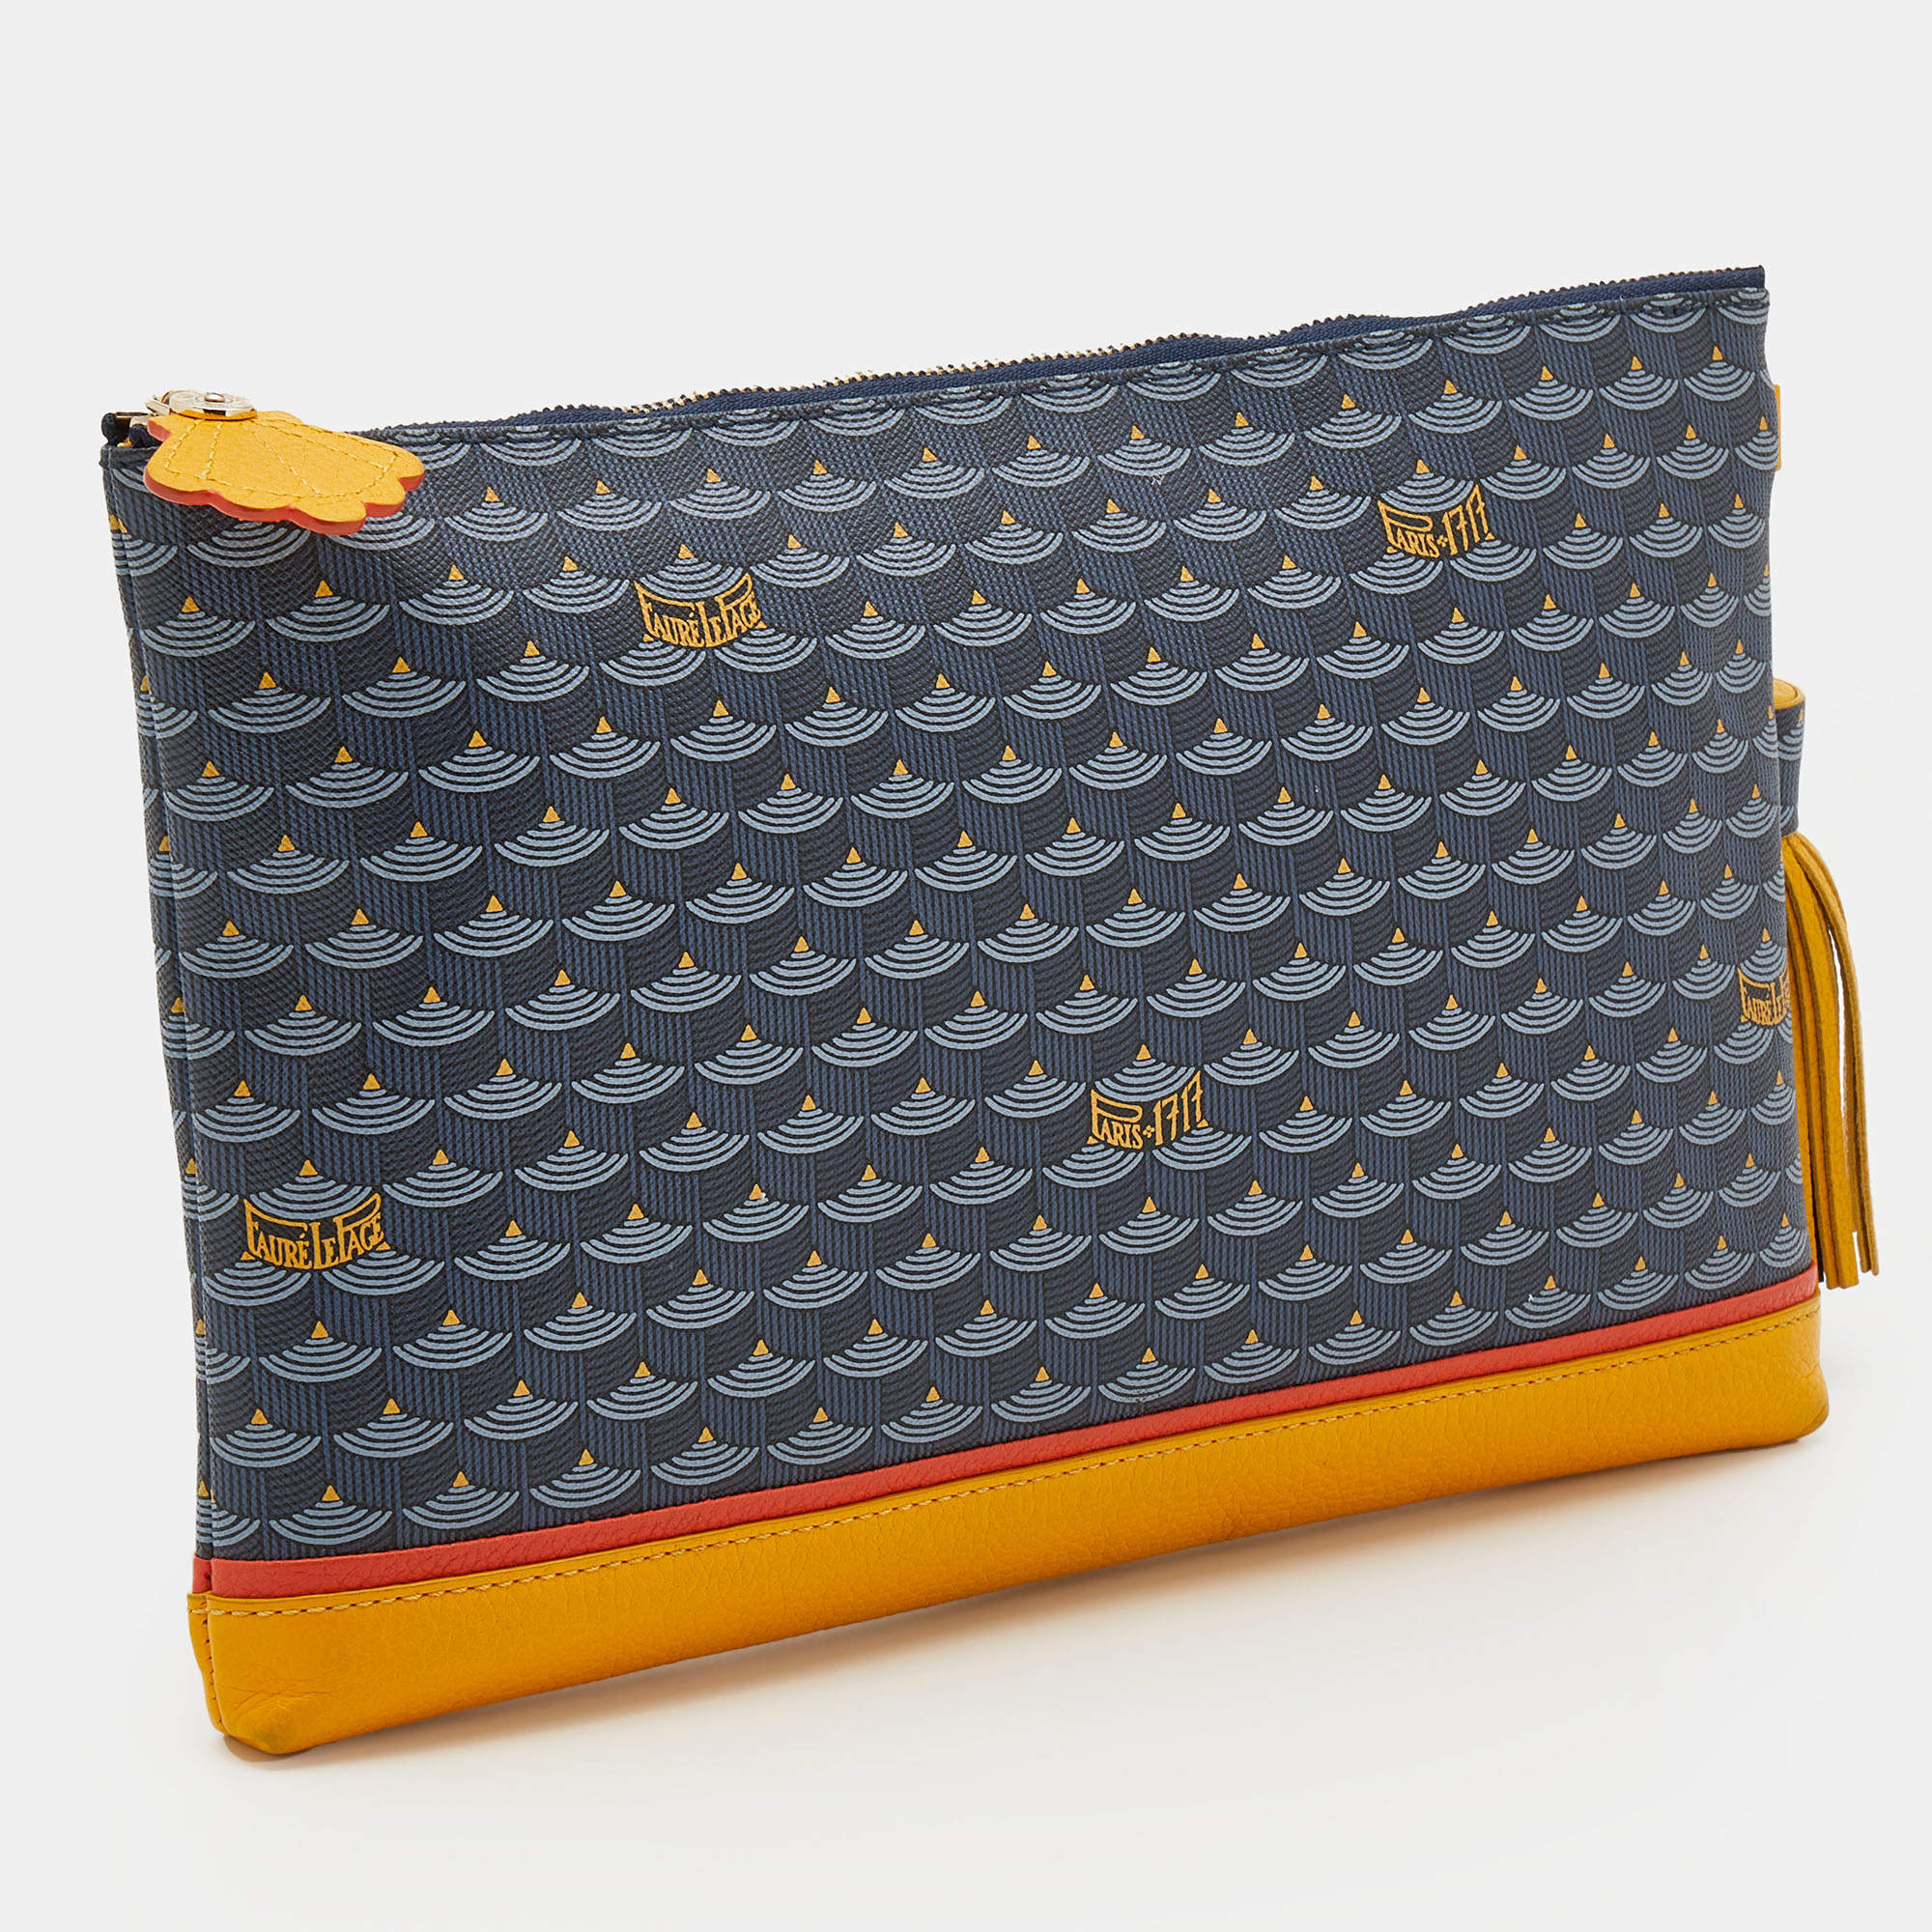 Faure Le Page Multicolor Coated Canvas And Leather Pochette Zip 29